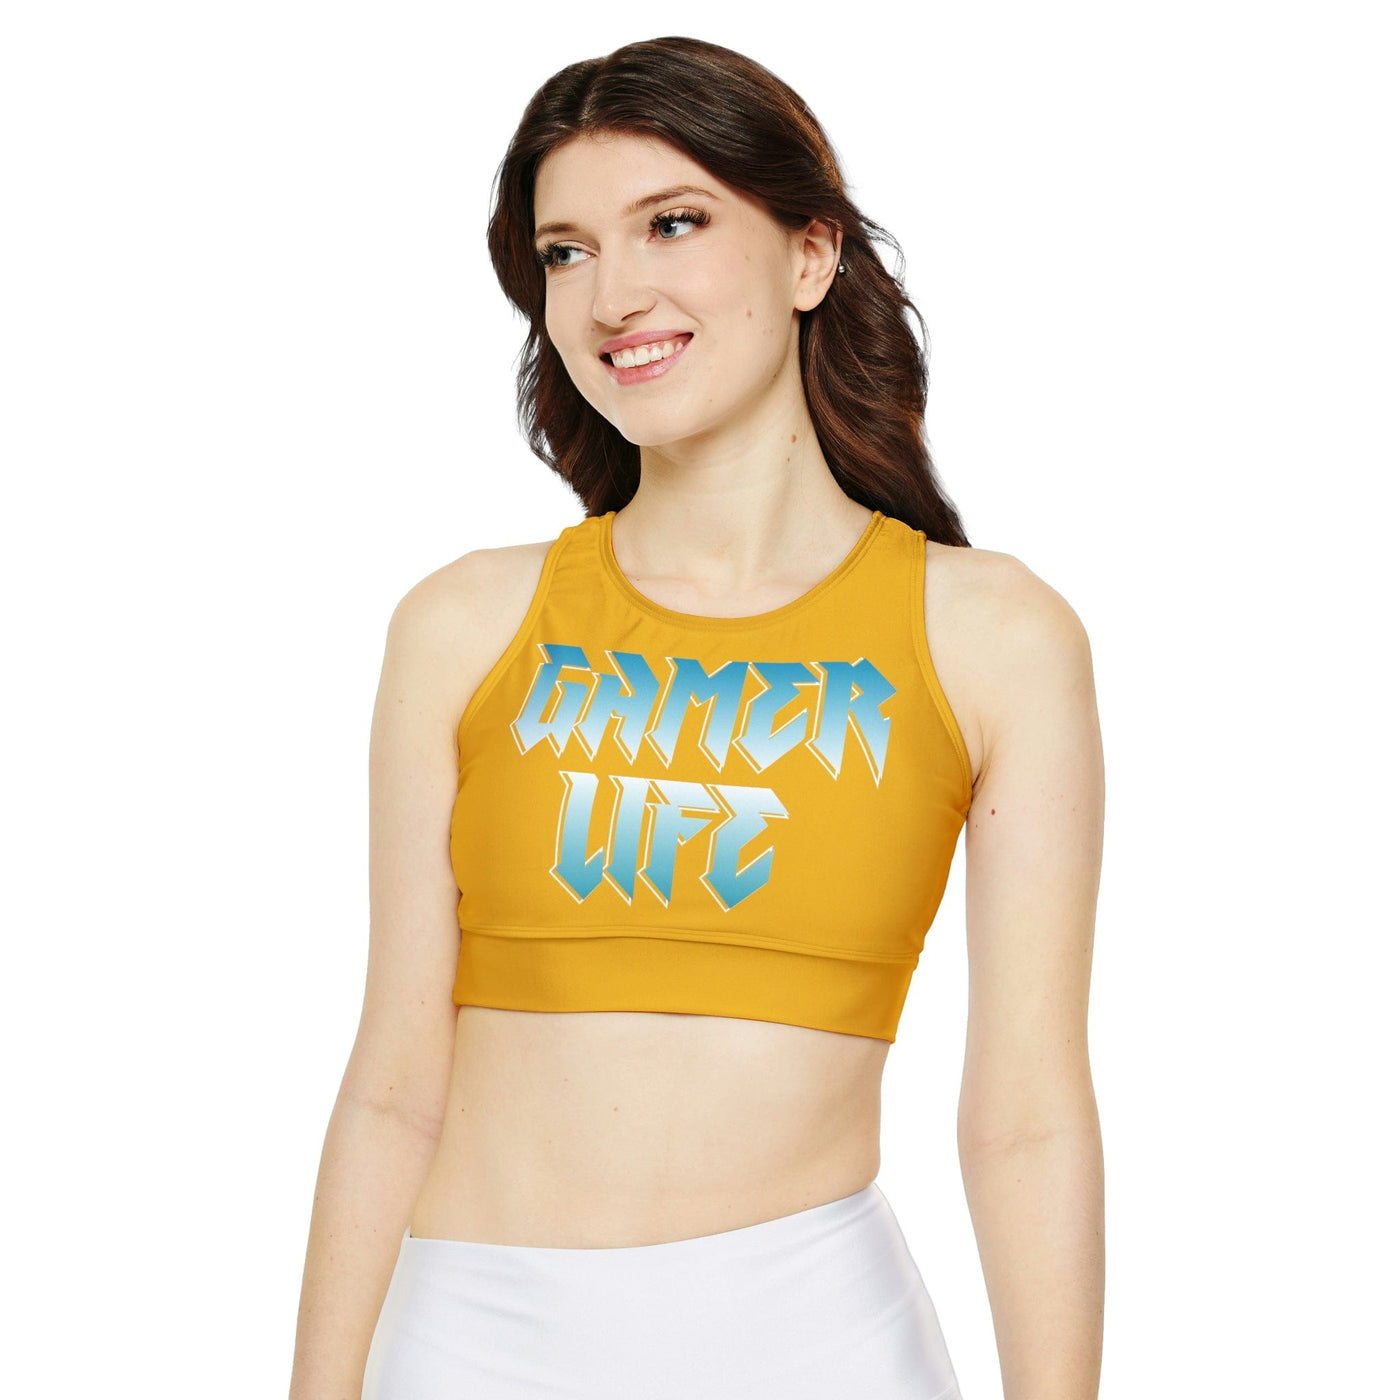 Gamer Fresh Limited Edition | Qahwah Pop | Fully Lined Padded Ladies Yellow Sports Bra